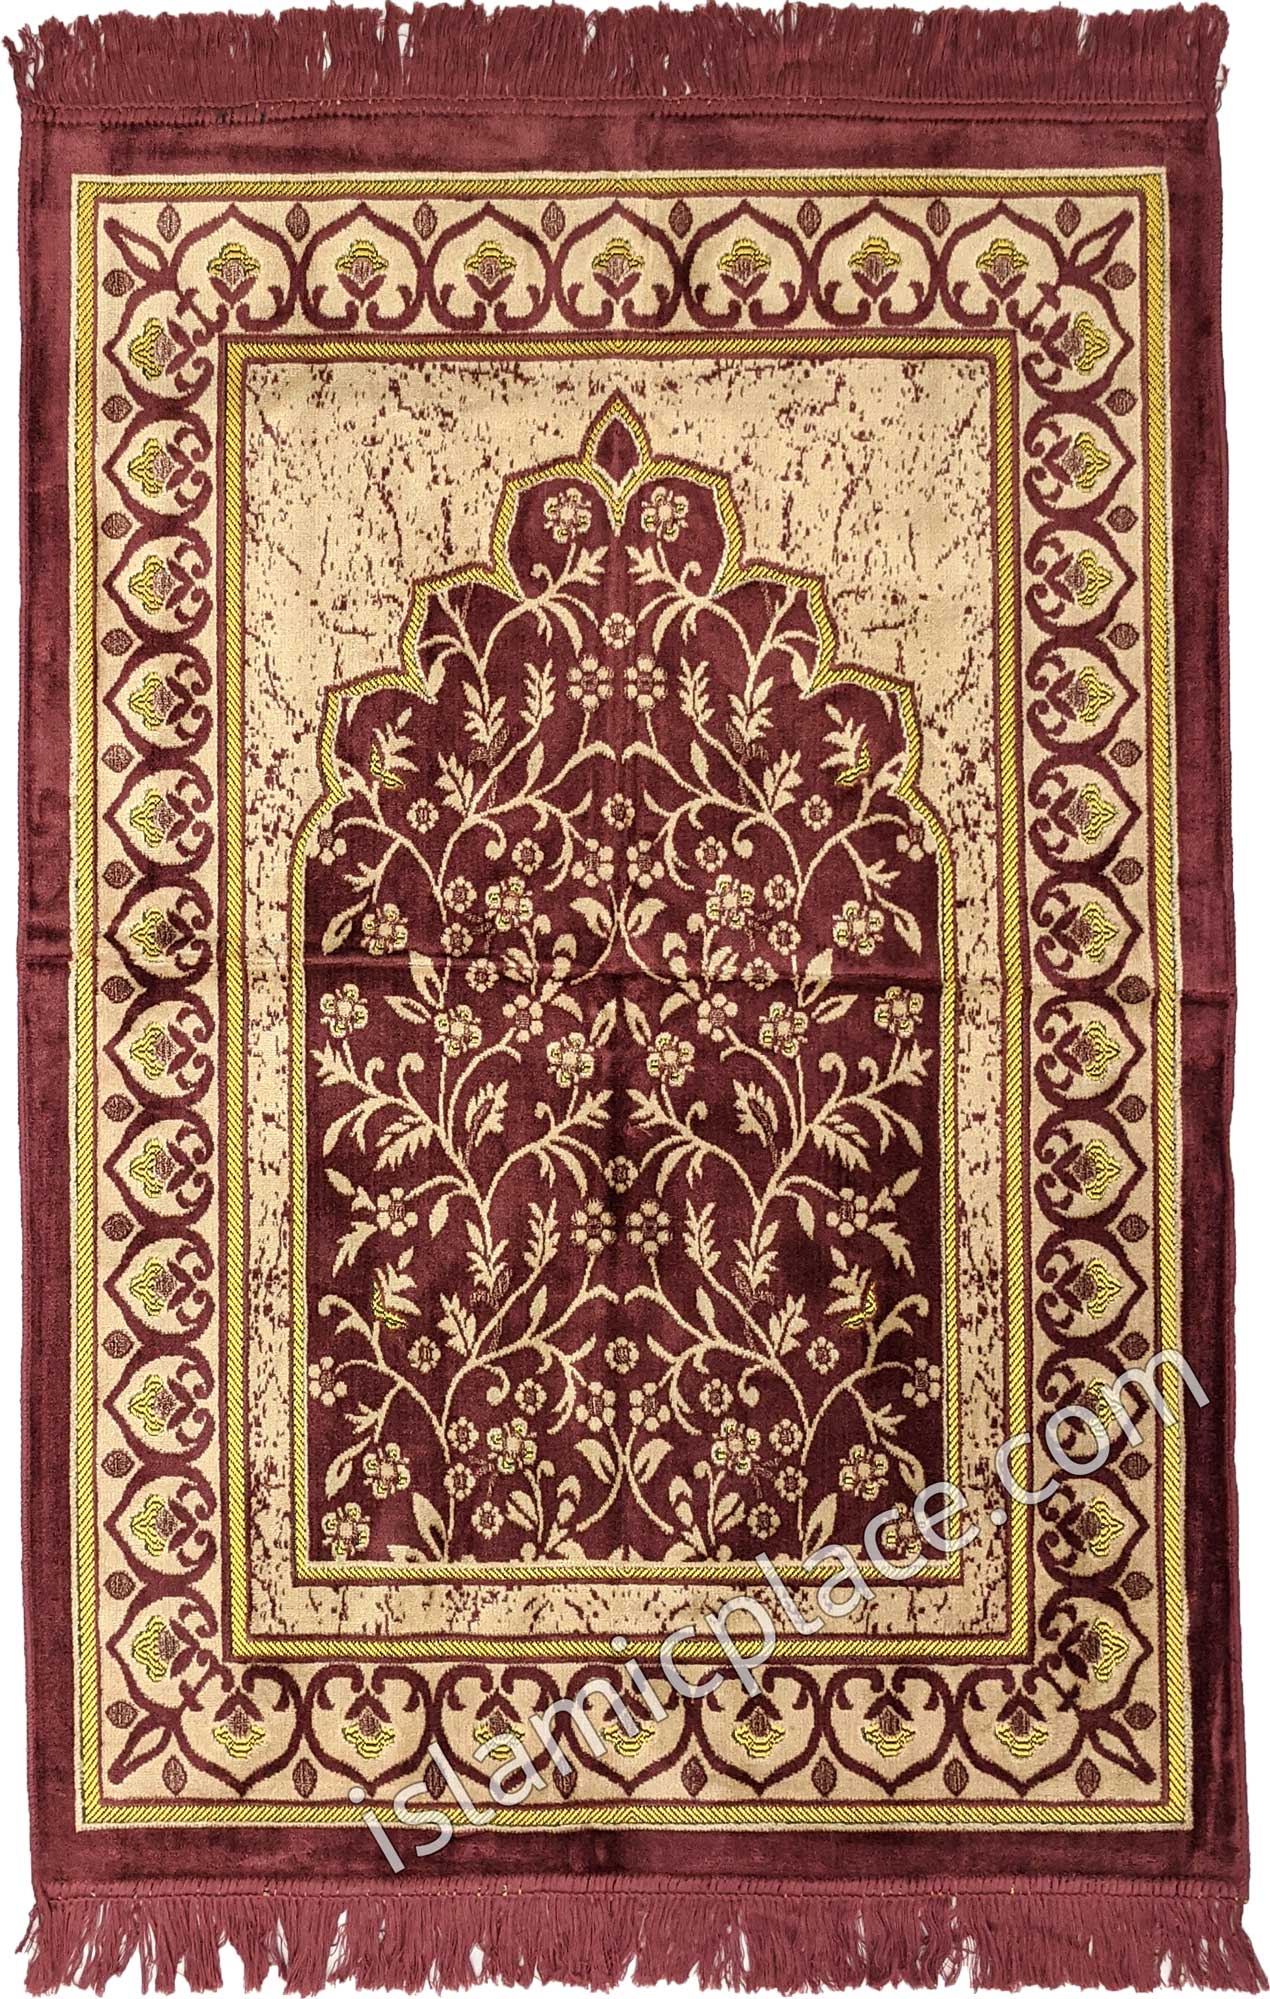 Dusty Rose Pink and Tan Prayer Rug with Petal Mihrab (Big & Tall size)